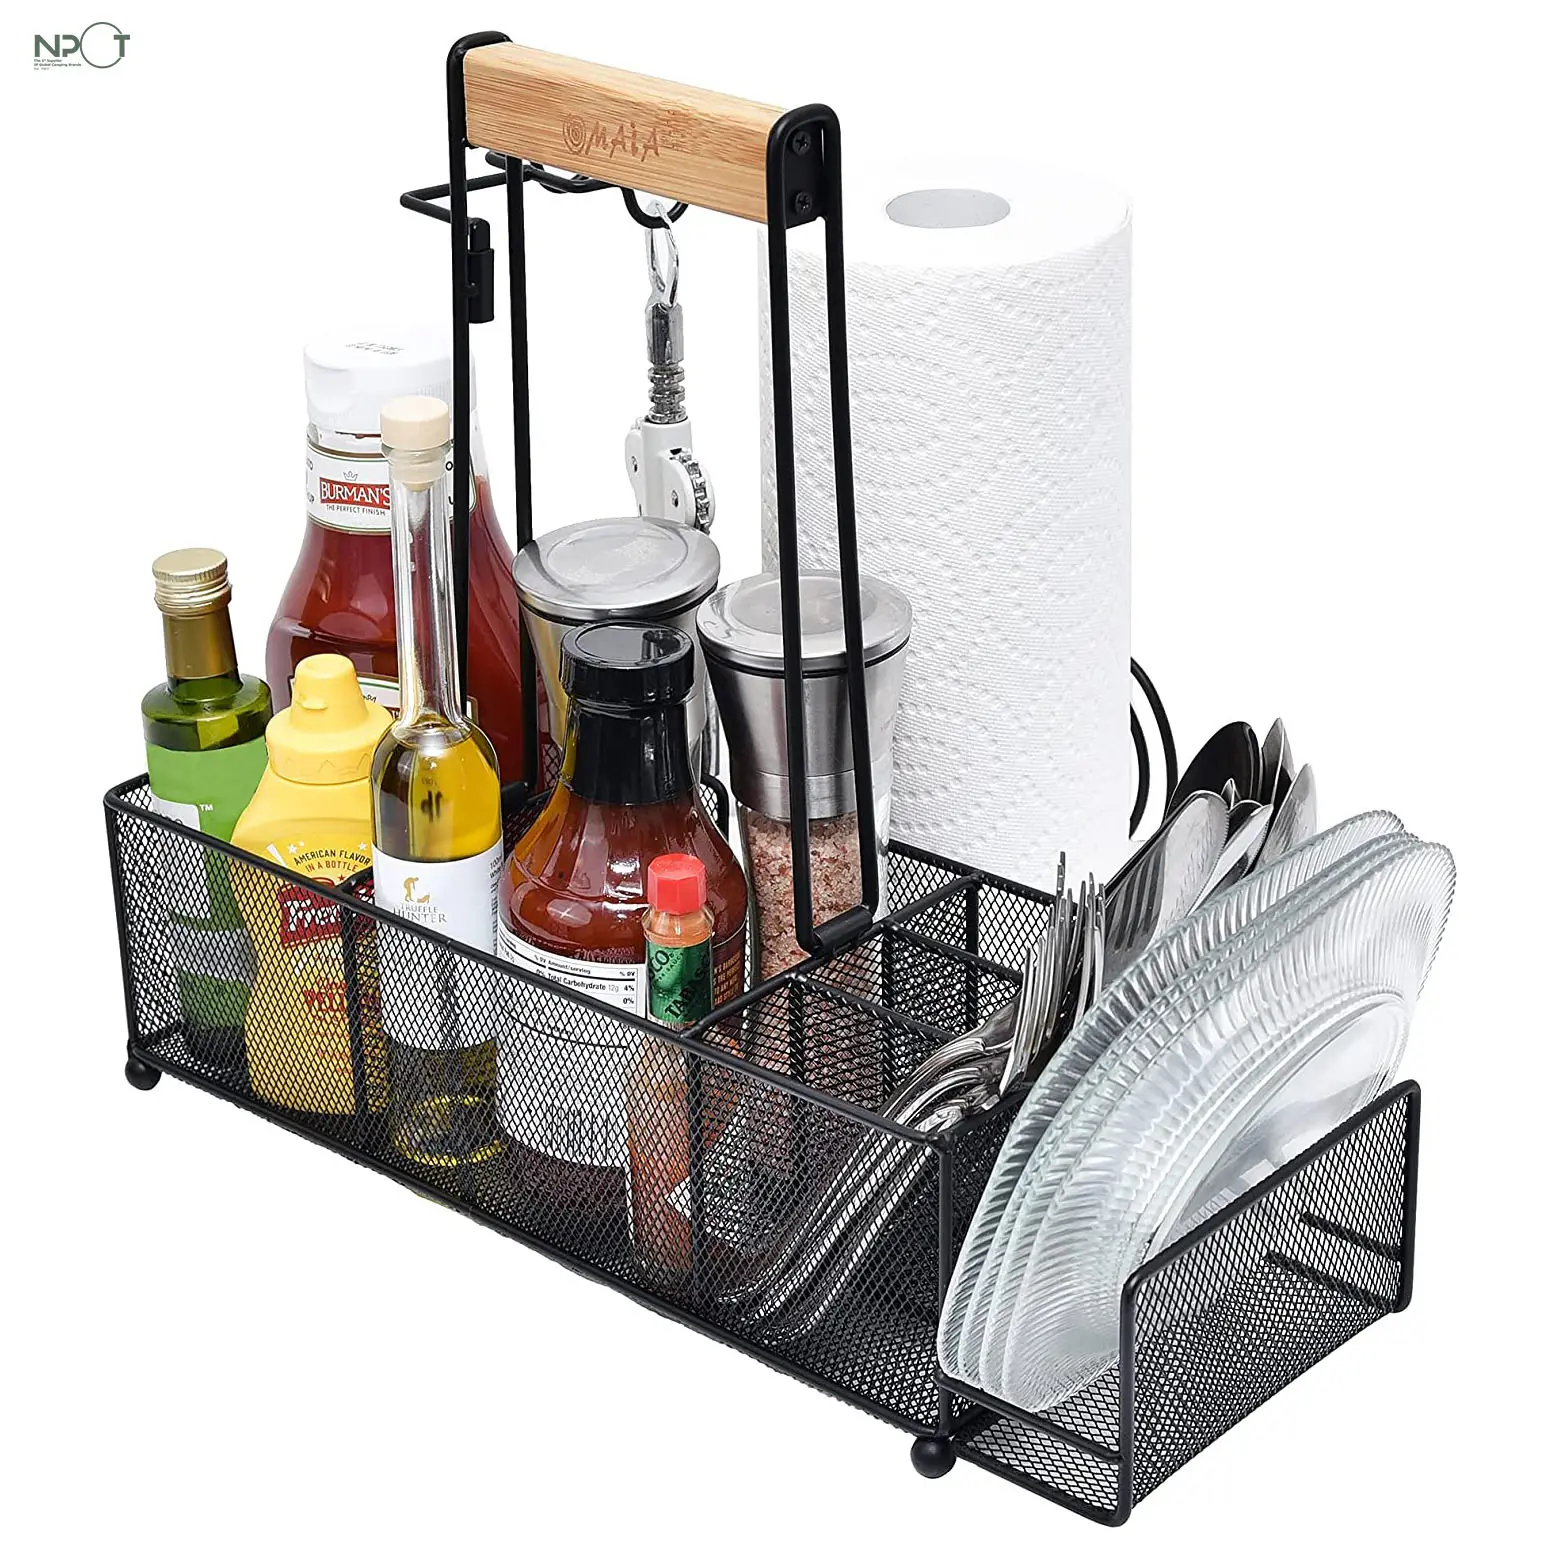 NPOT BBQ and Grill Caddy with Paper Towel Holder Wooden Handle and 2 Hooks RV Accessories Plates,Cutlery and Barbecue Organizer